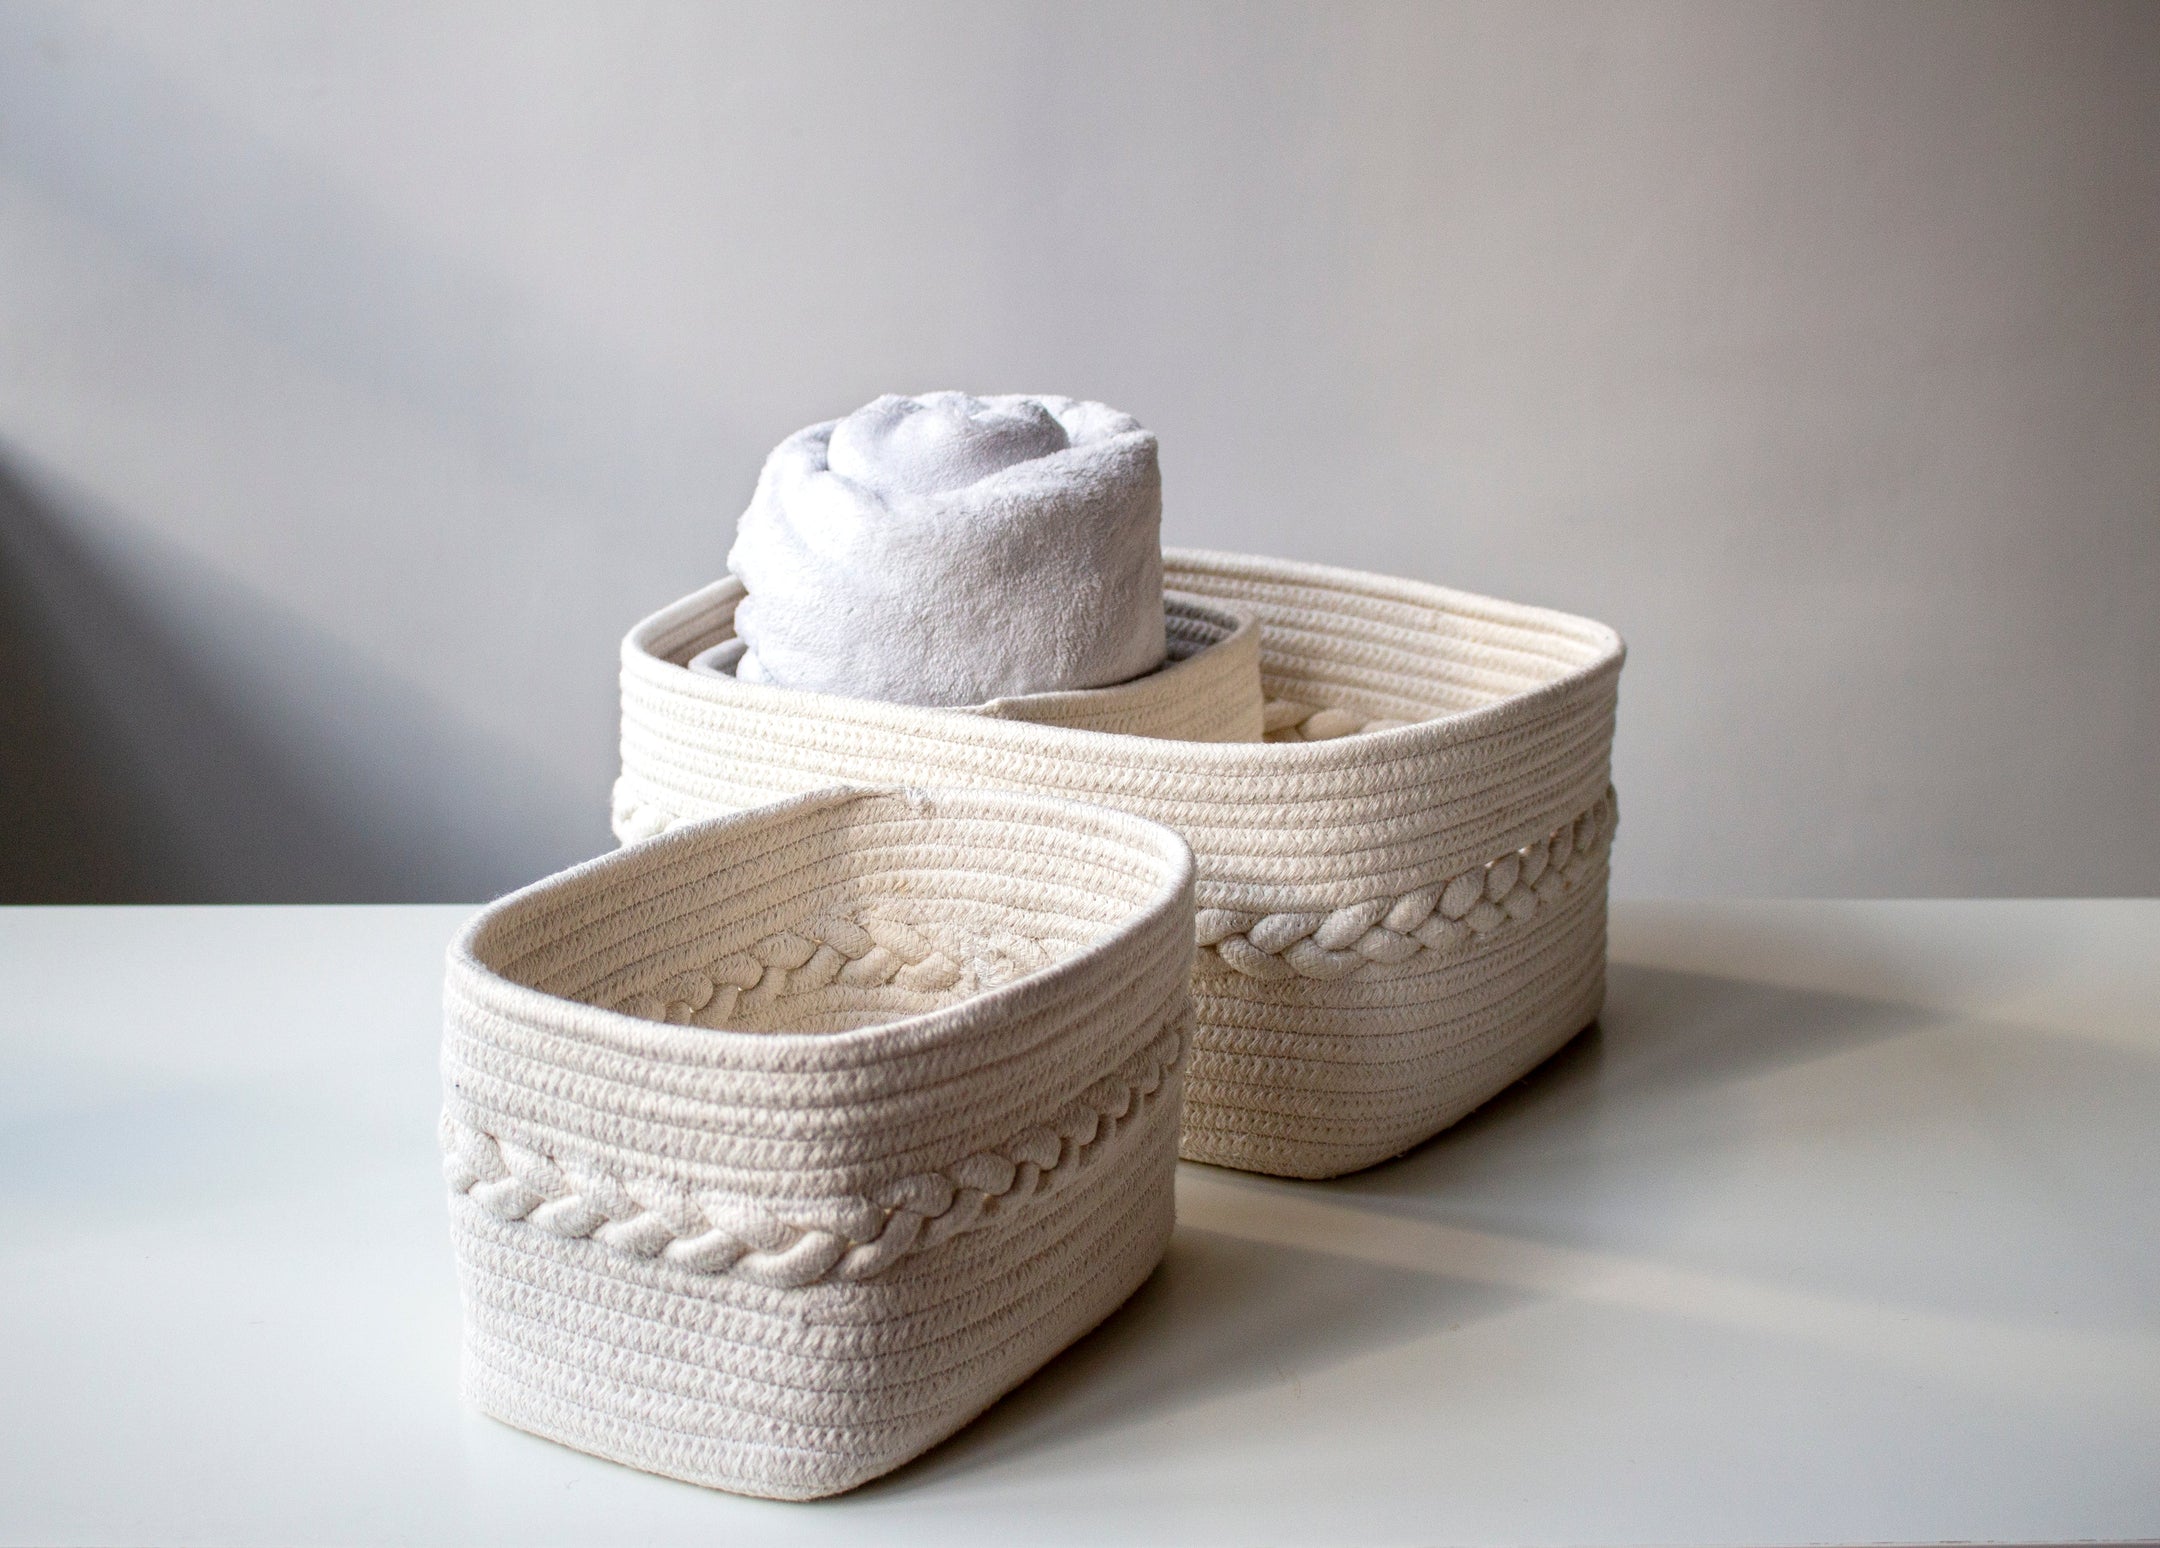 Buy Assorted Set Of 3 Dharma Cotton Rope Organizer Baskets, Ivory by Shiraleah